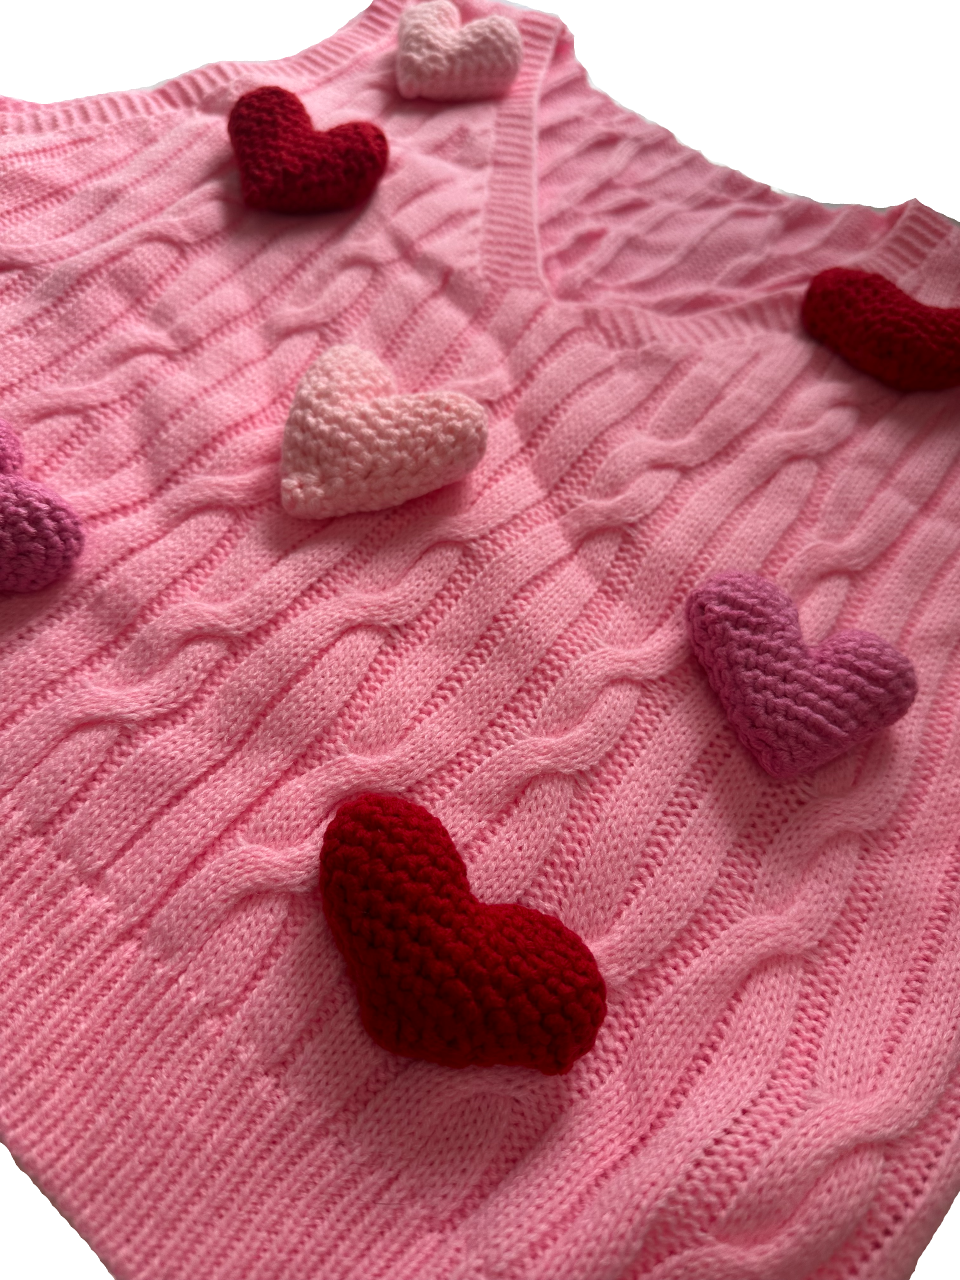 Pink vest adorned with 3D hearts in shades of pink and red.